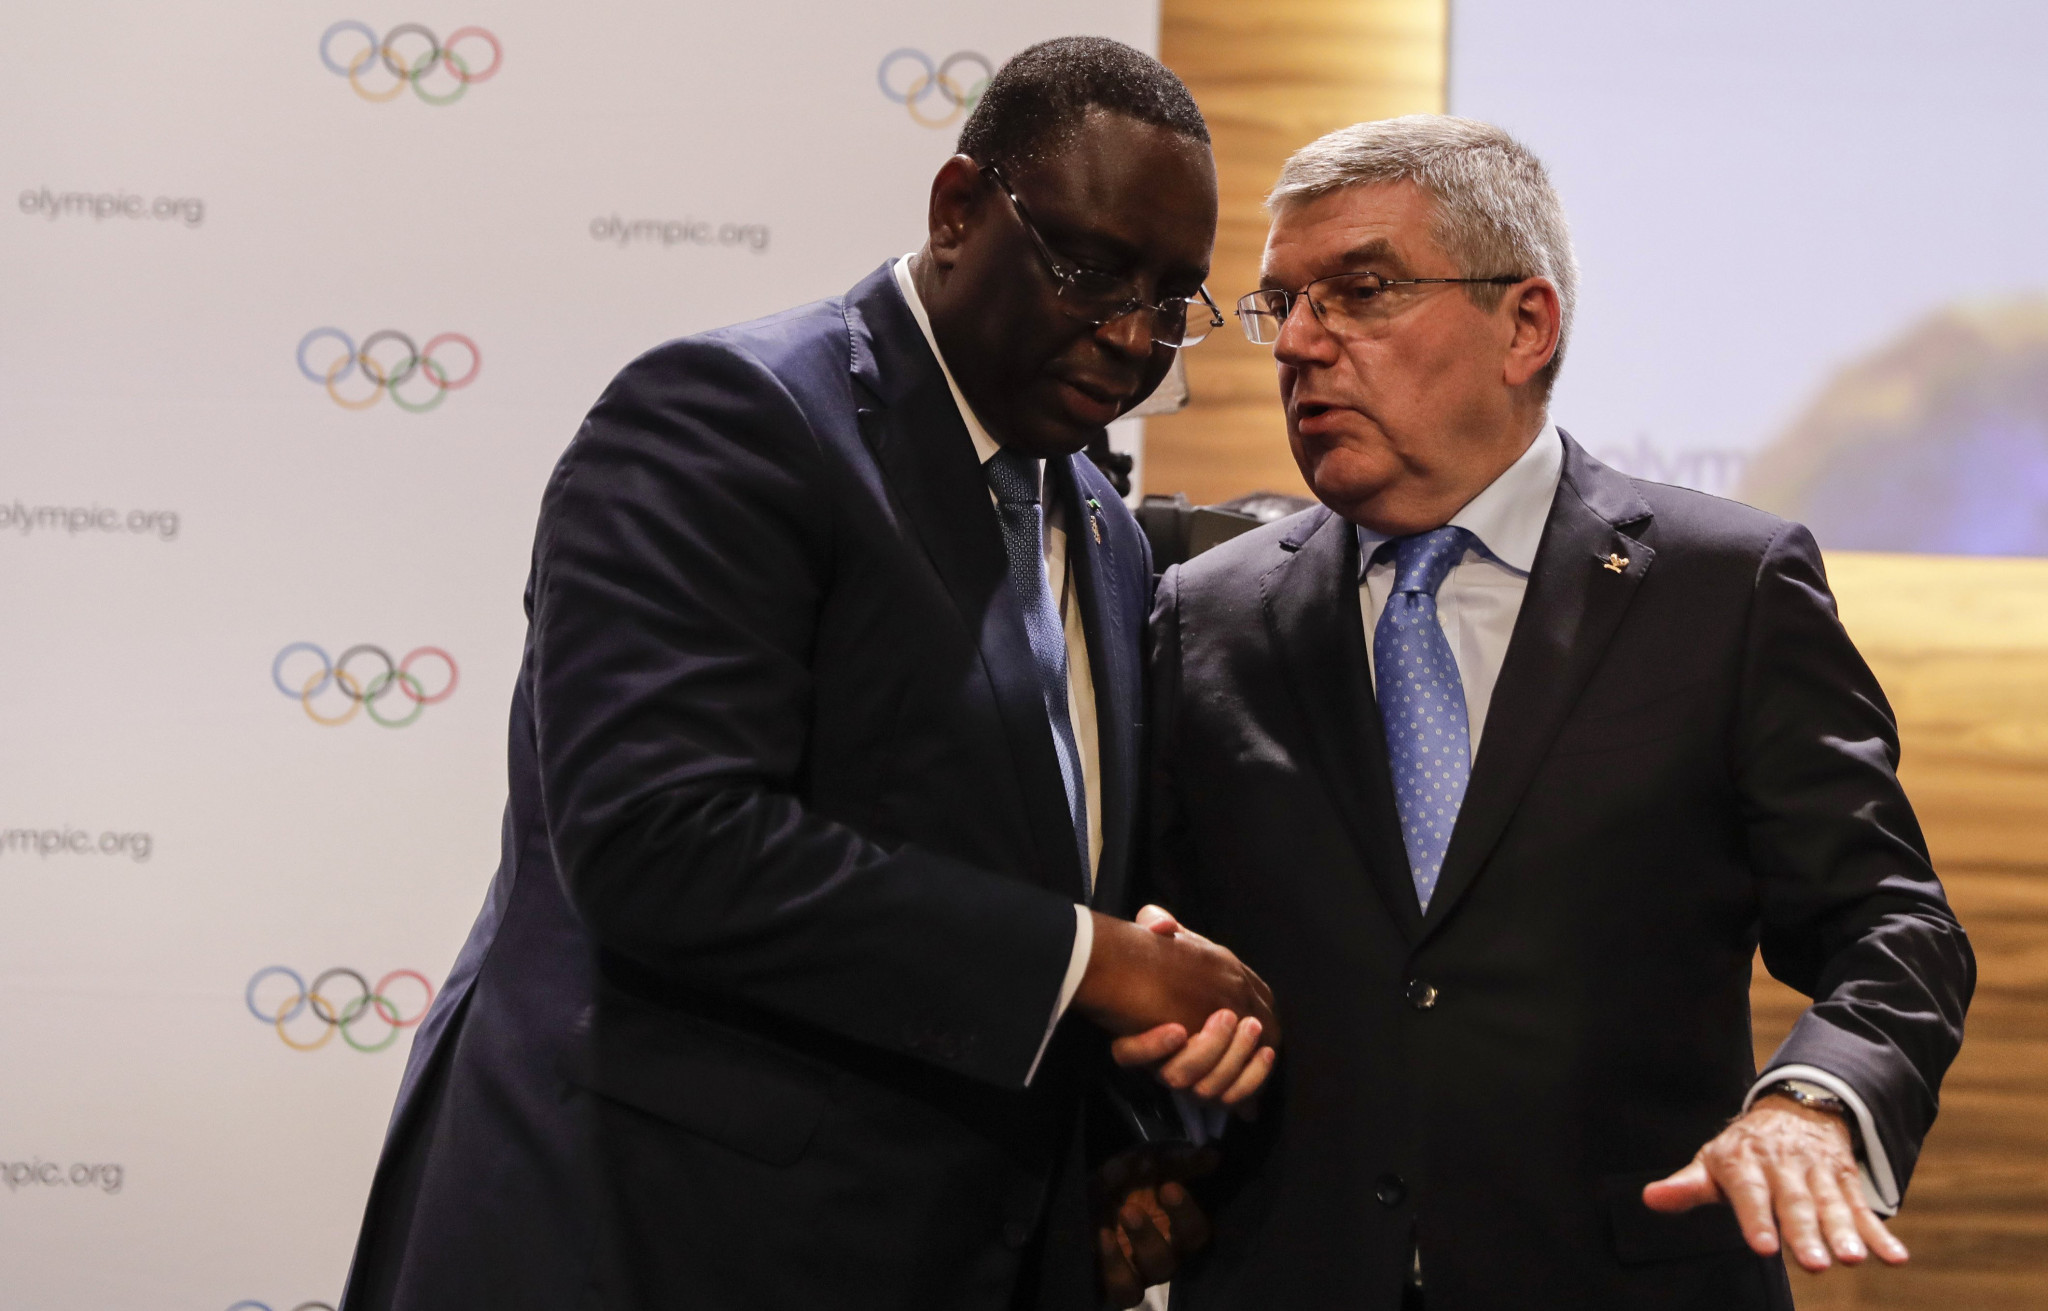 IOC President Thomas Bach called for swift action in a letter sent to Senegal President Macky Sall ©Getty Images